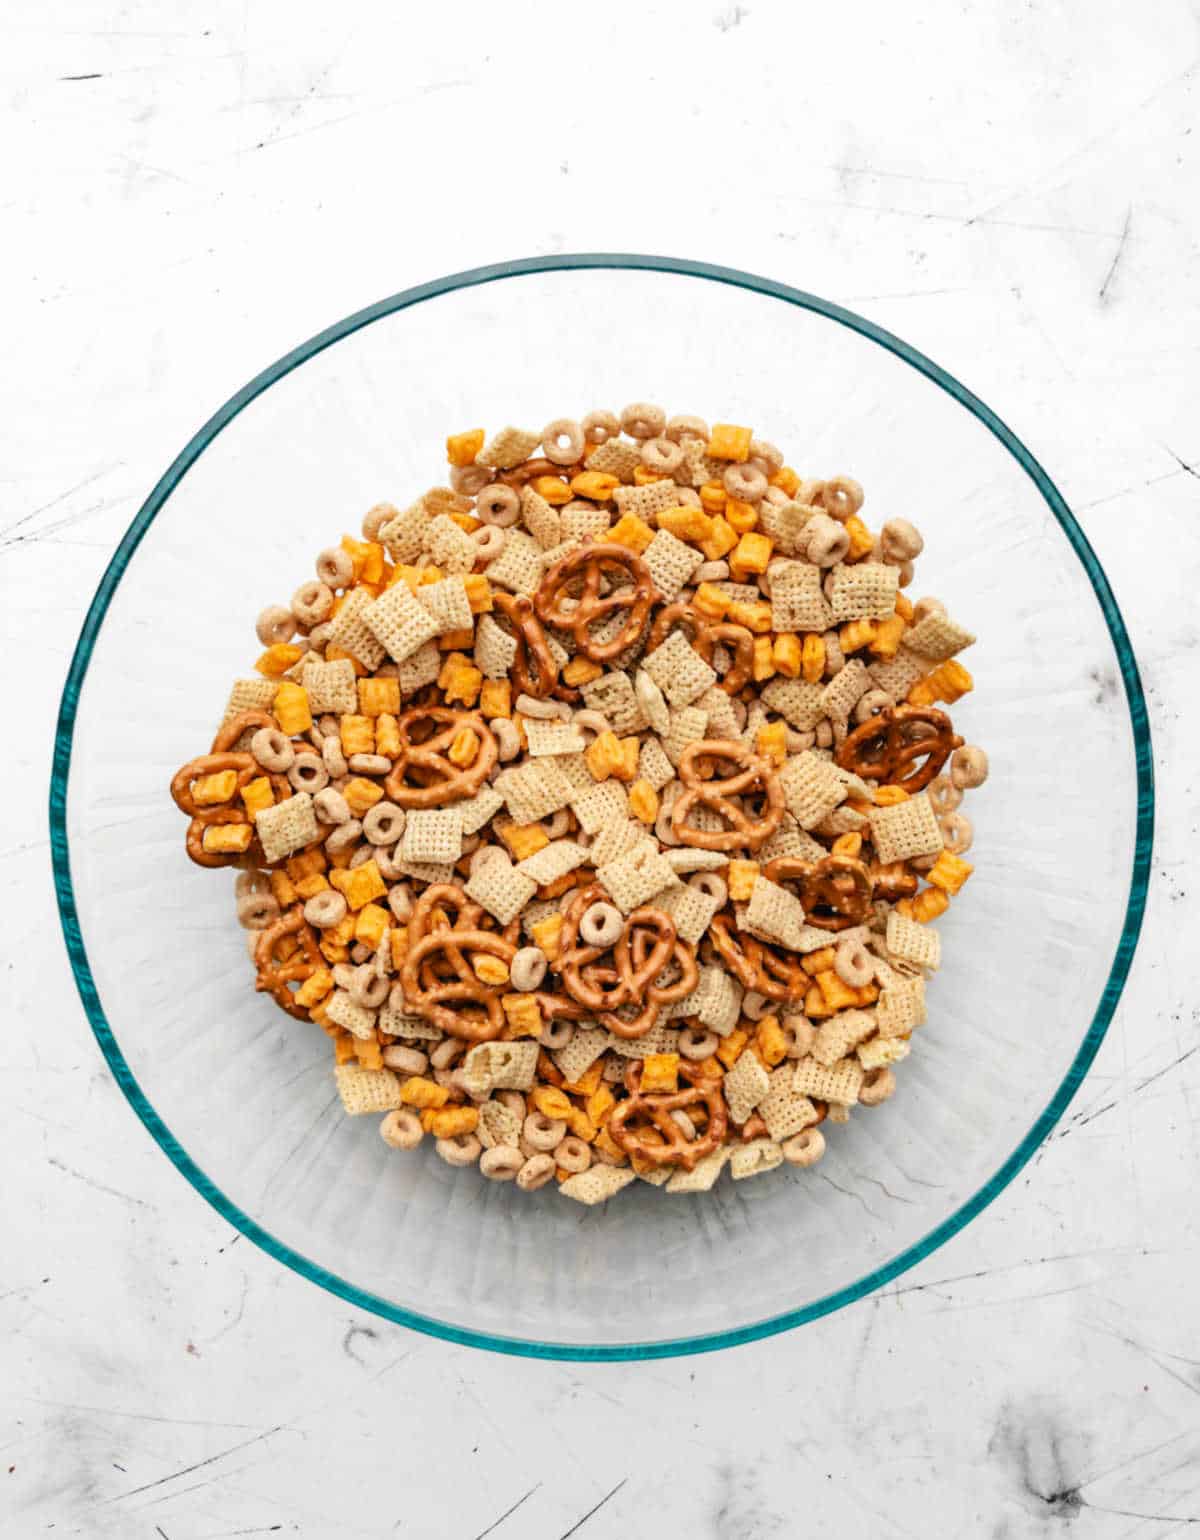 Cereals and pretzels in a glass mixing bowl. 